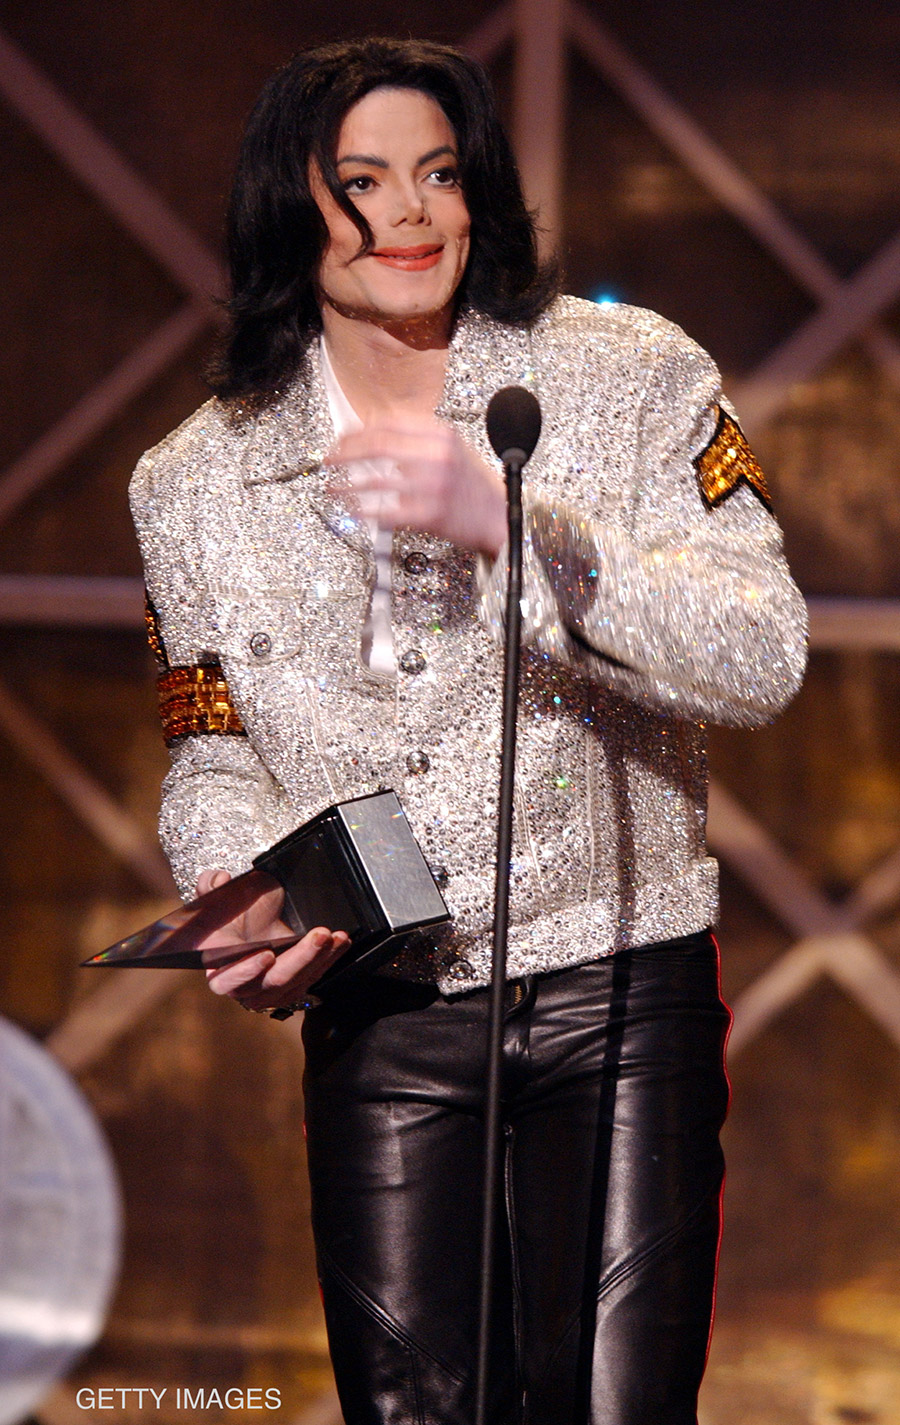 Michael Jackson Received Artist Of The Century Award In January 2002